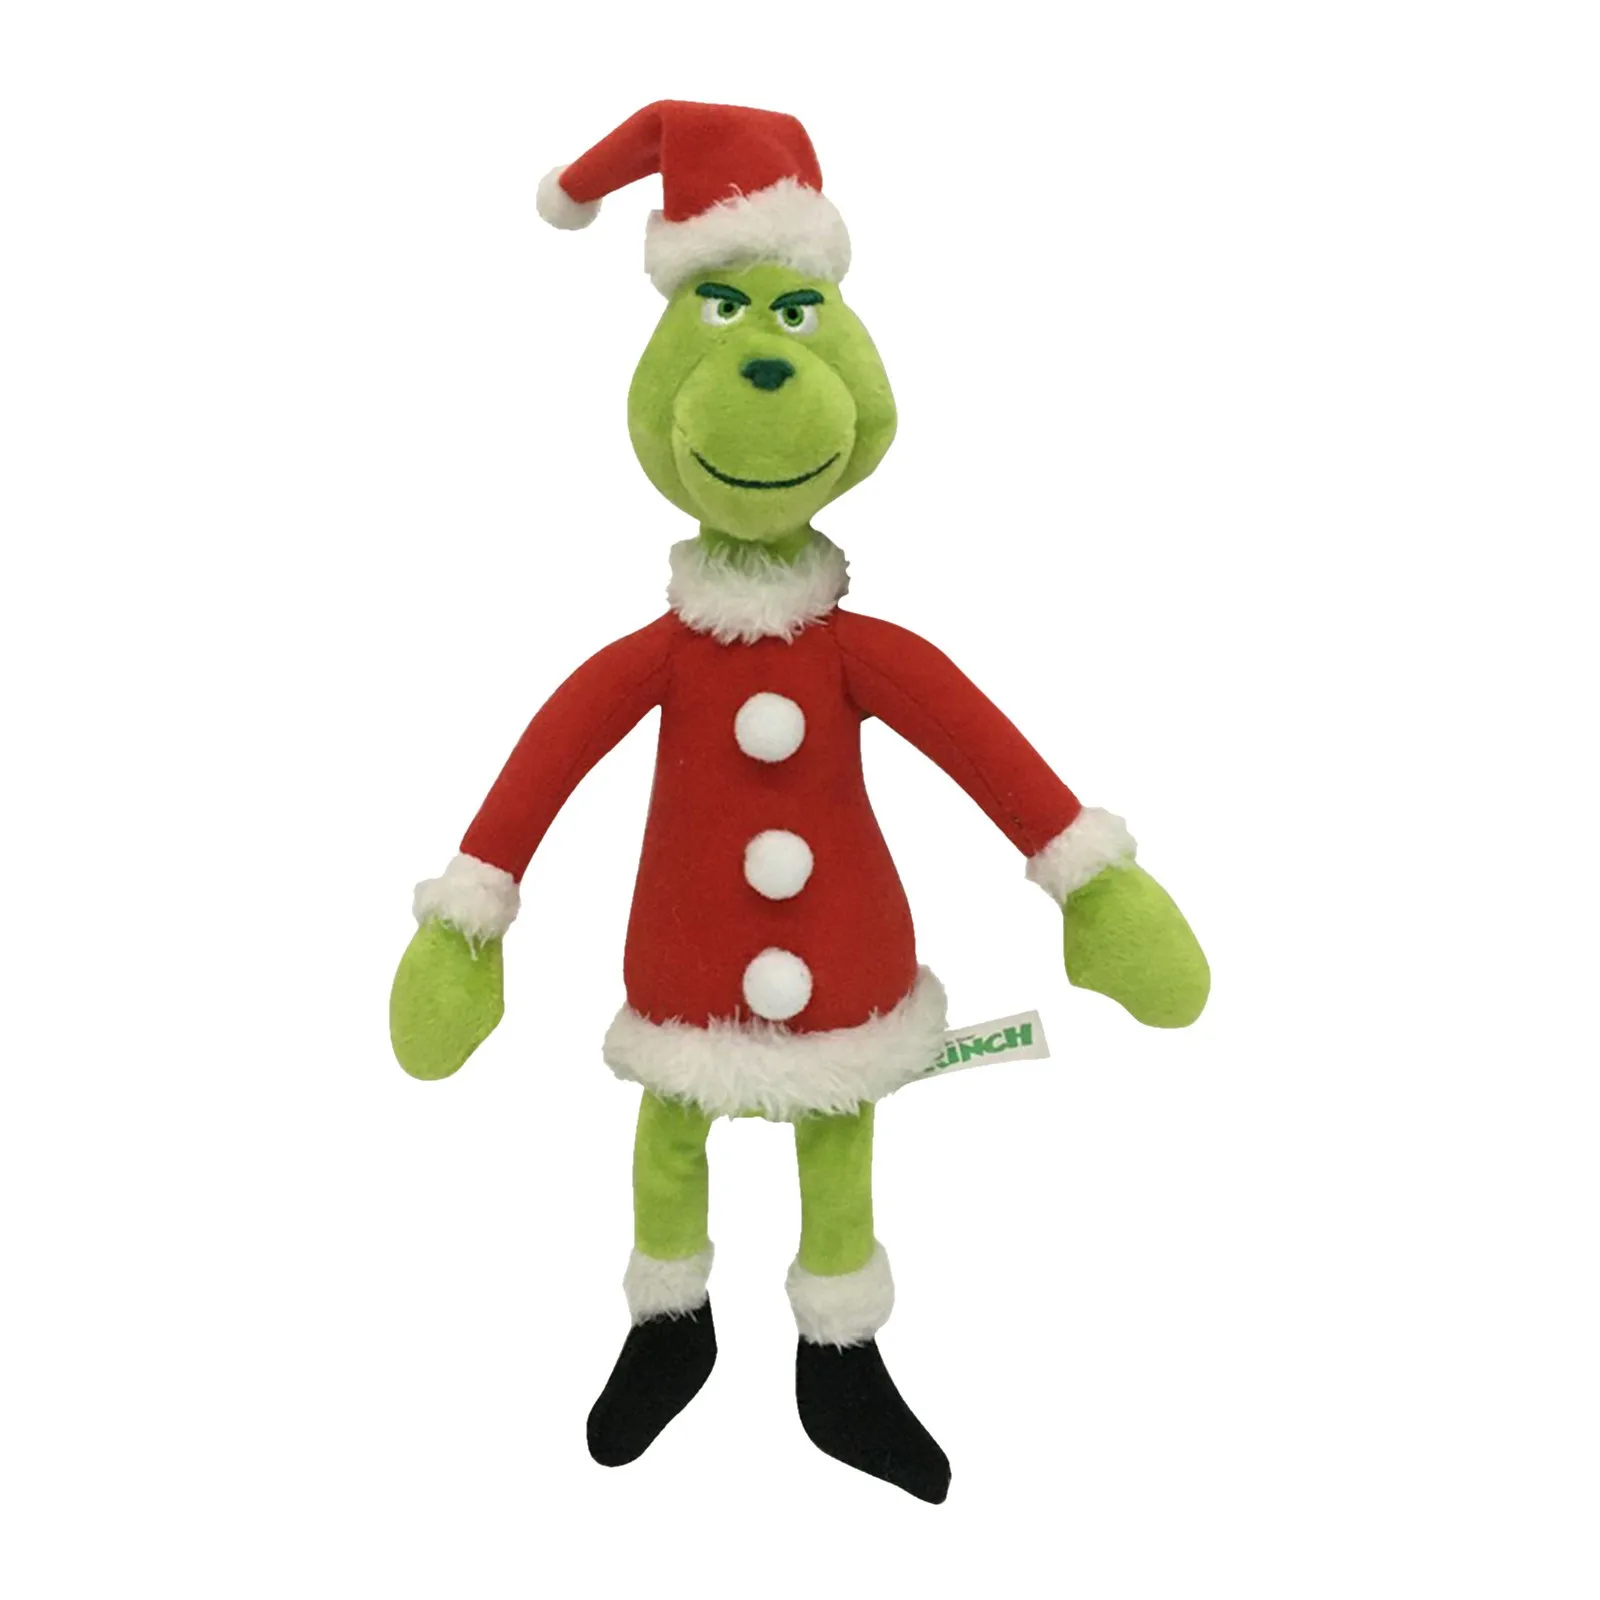 32cm Hot Greench Grinch Christmas Green Geek Plush Toys Soft Green Geek Dolls In Stock Wholesale Christmas Gifts New Party Decor